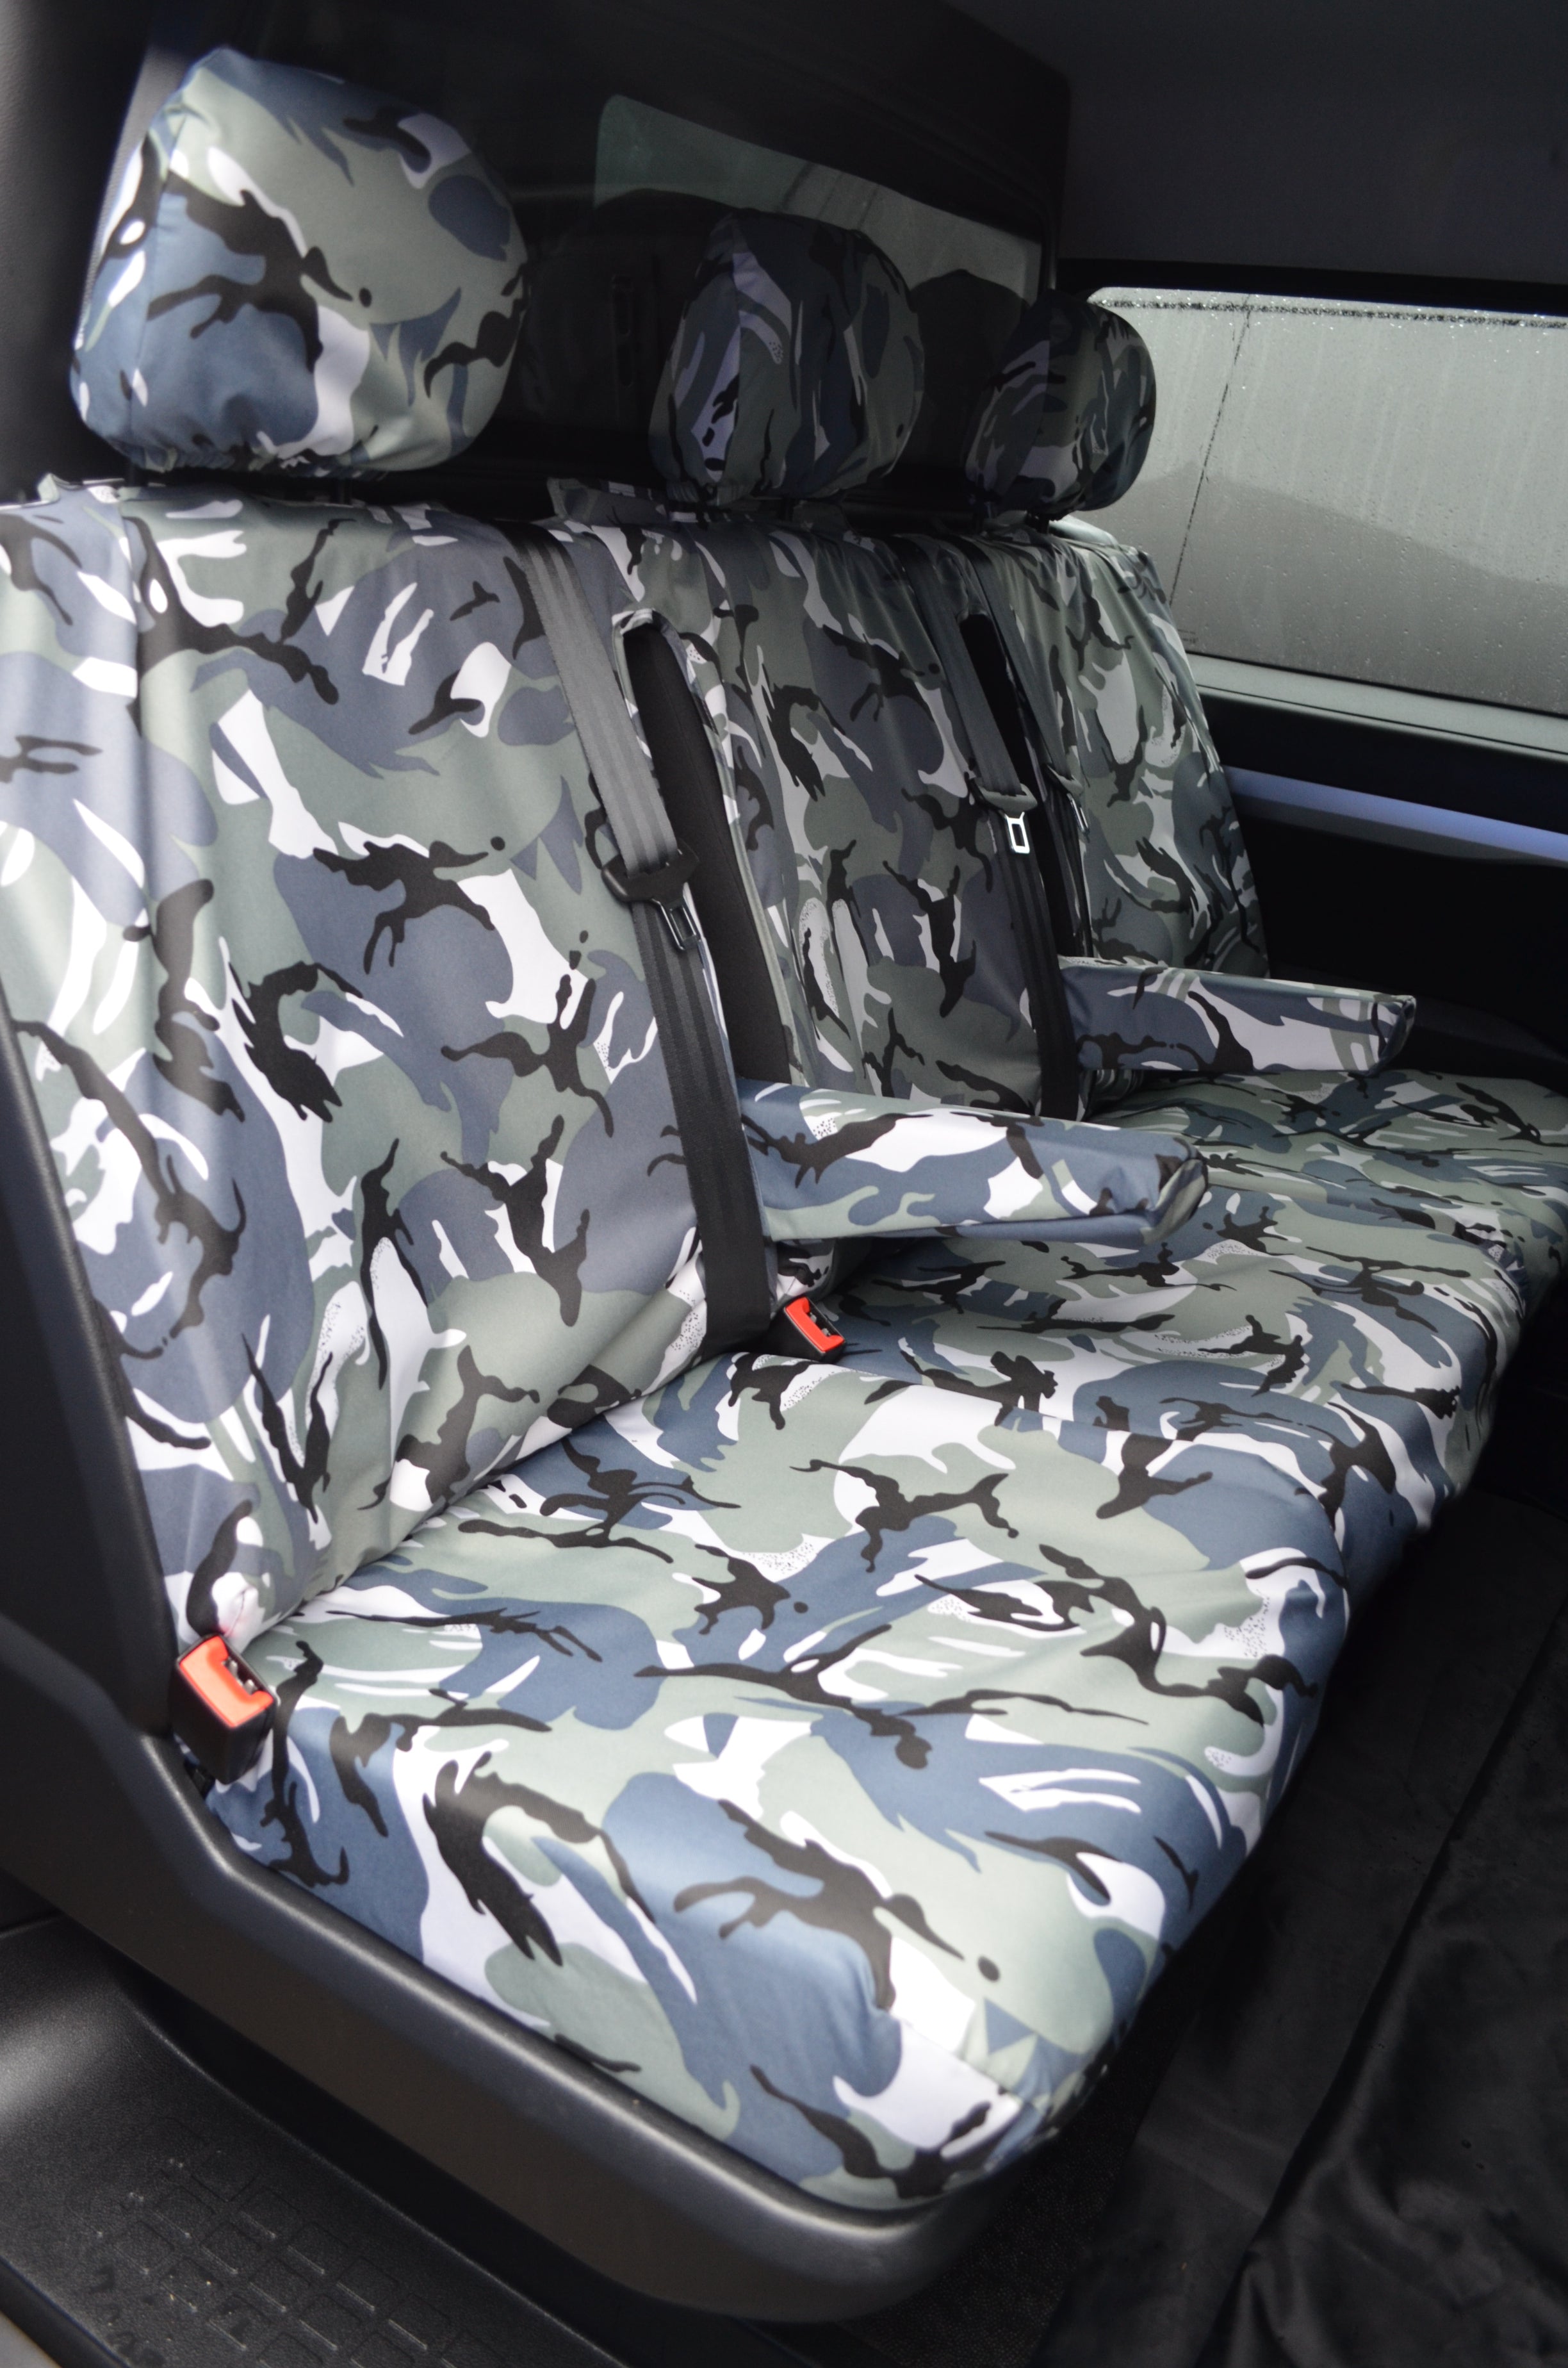 Peugeot Expert 2016+ Crew Cab Rear Tailored Seat Cover  Turtle Covers Ltd